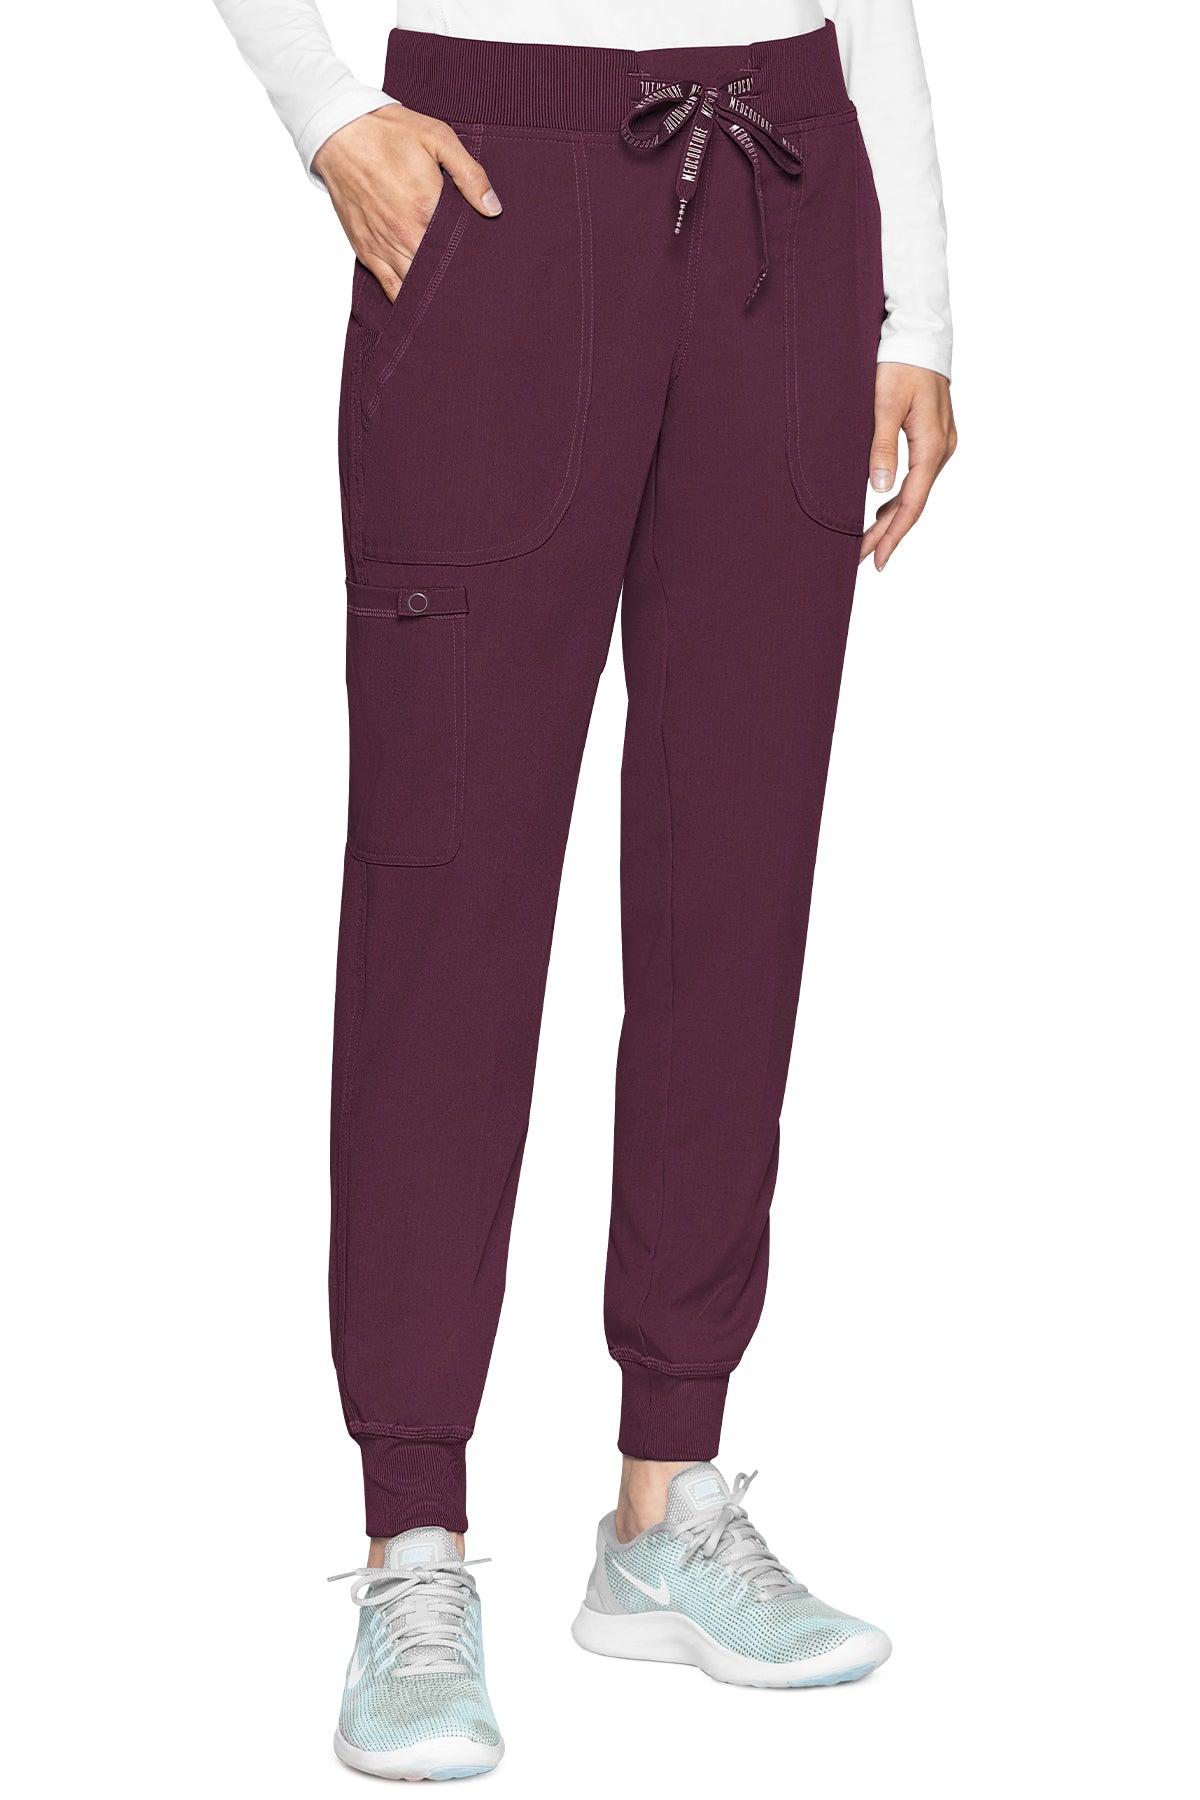 TOUCH-JOGGER-WOMENS-YOGA-PANT-WINE-MED-COUTURE-SCRUB-ENVY